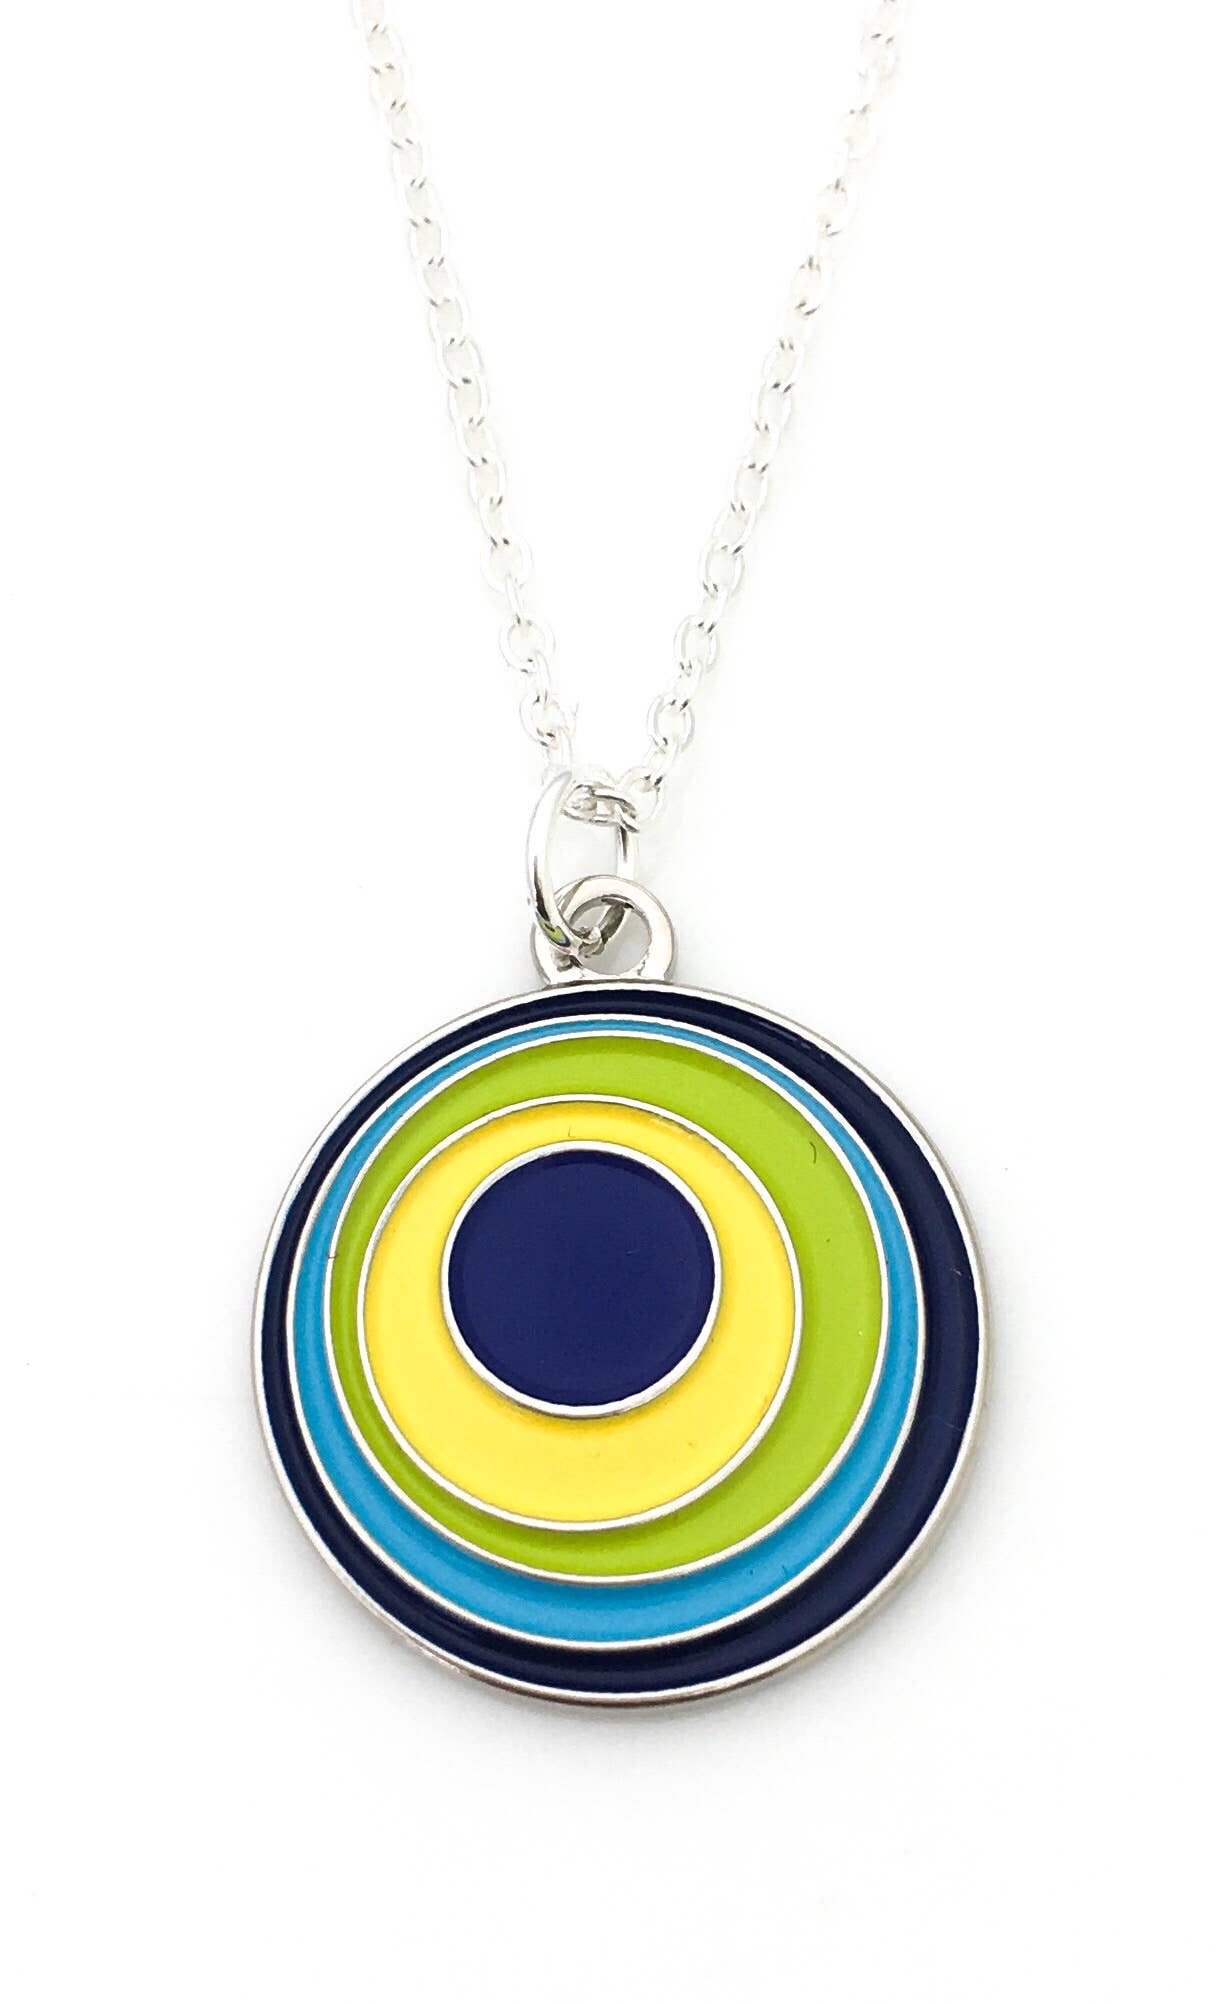 Round necklace with circles within circles blue and yellow